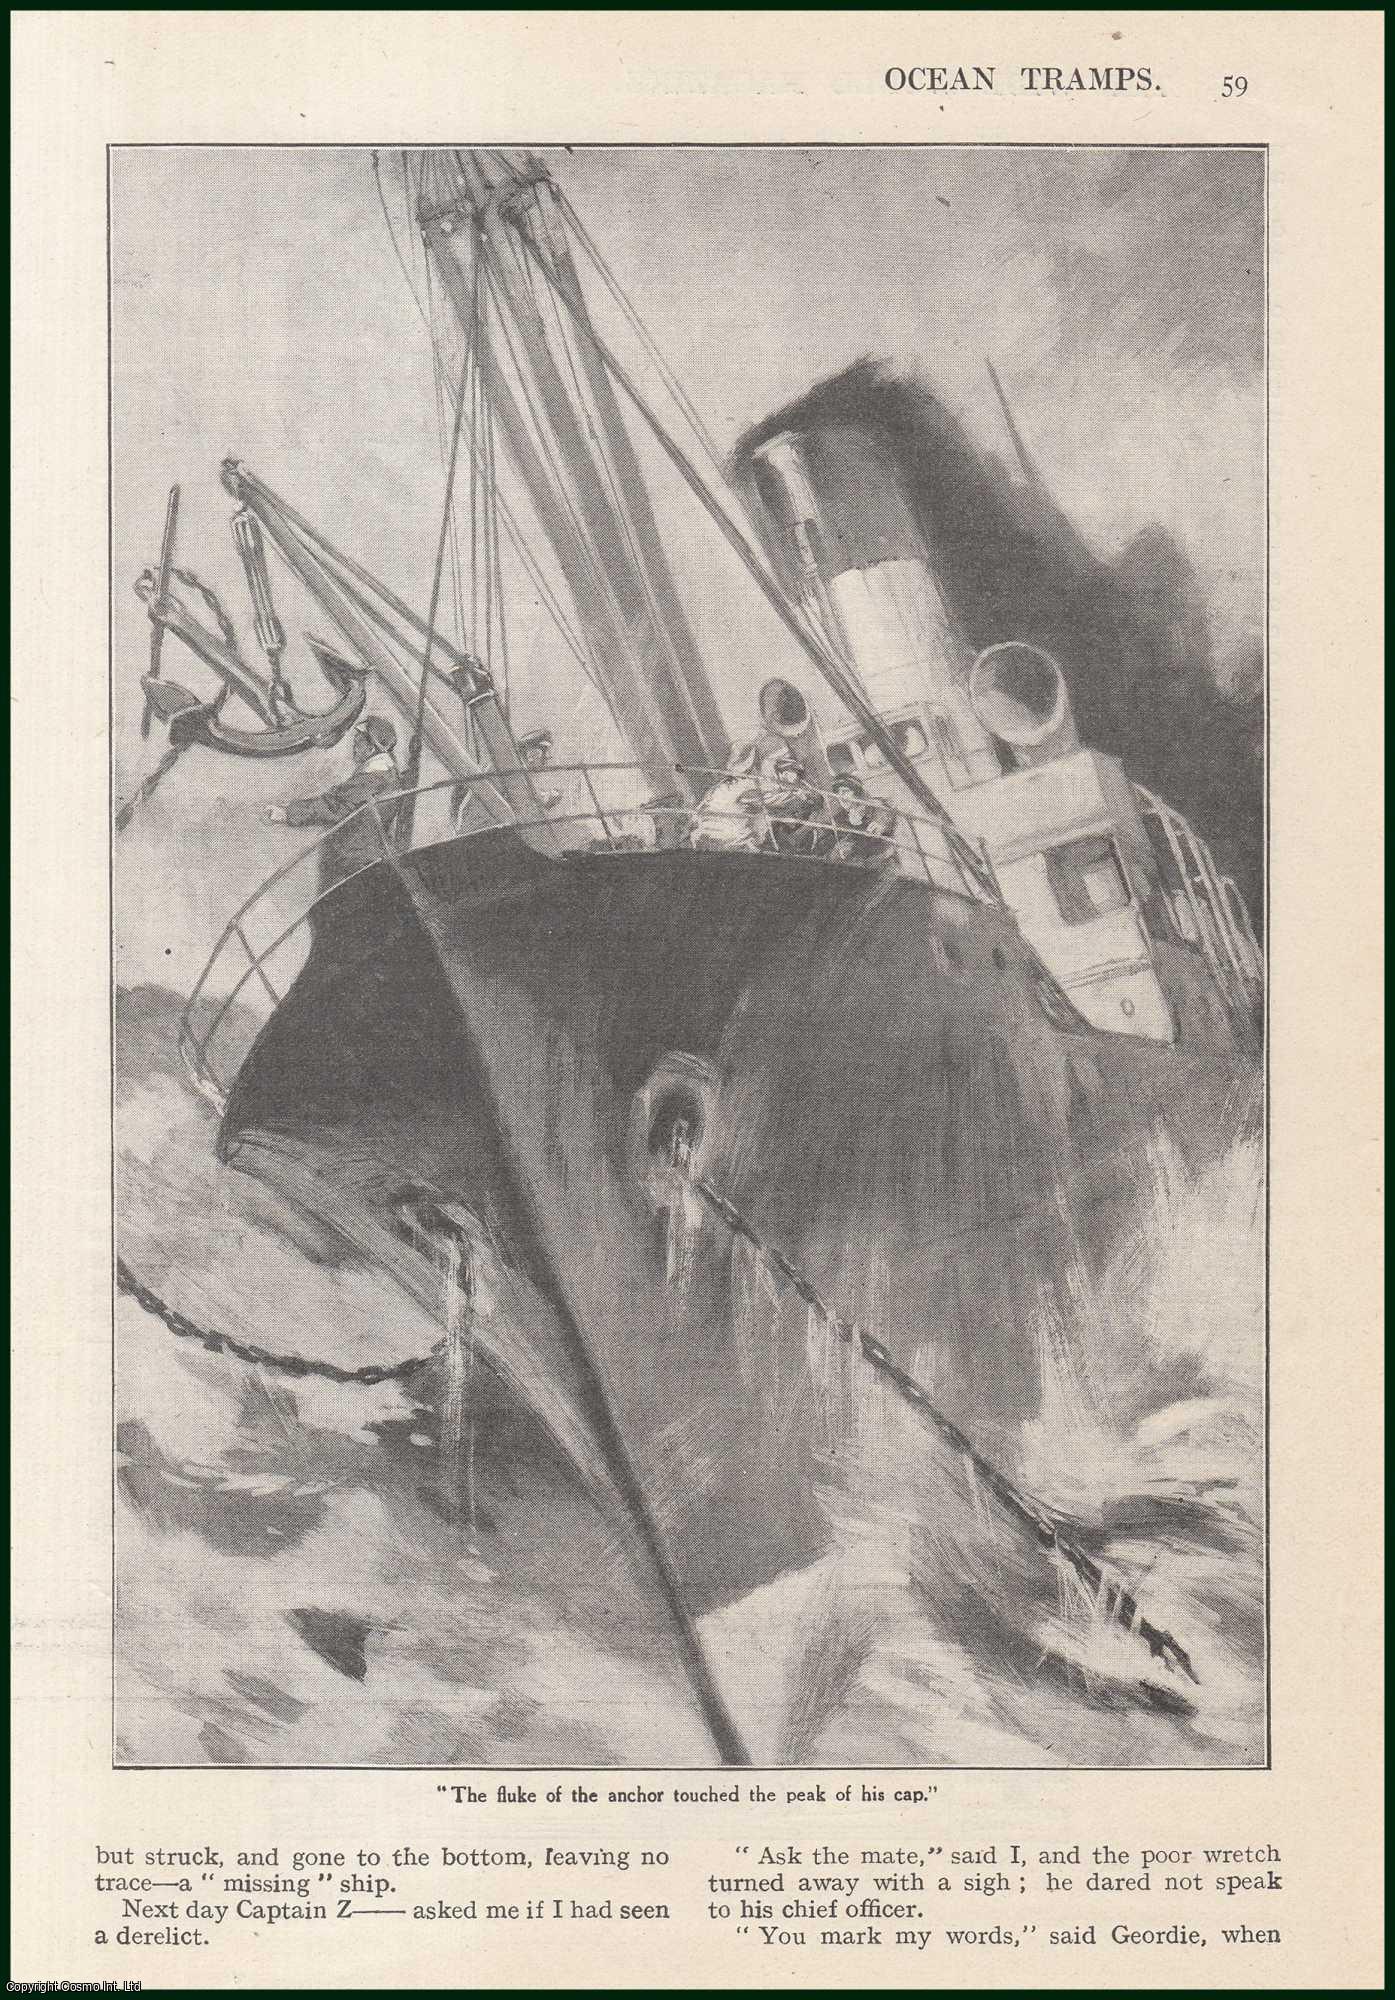 Roger Pocock, illustrated by W.E. Wigfull. - Ocean Tramps, tramp steamers on ships during the Great War. This is an uncommon original article from the Wide World Magazine, 1920.